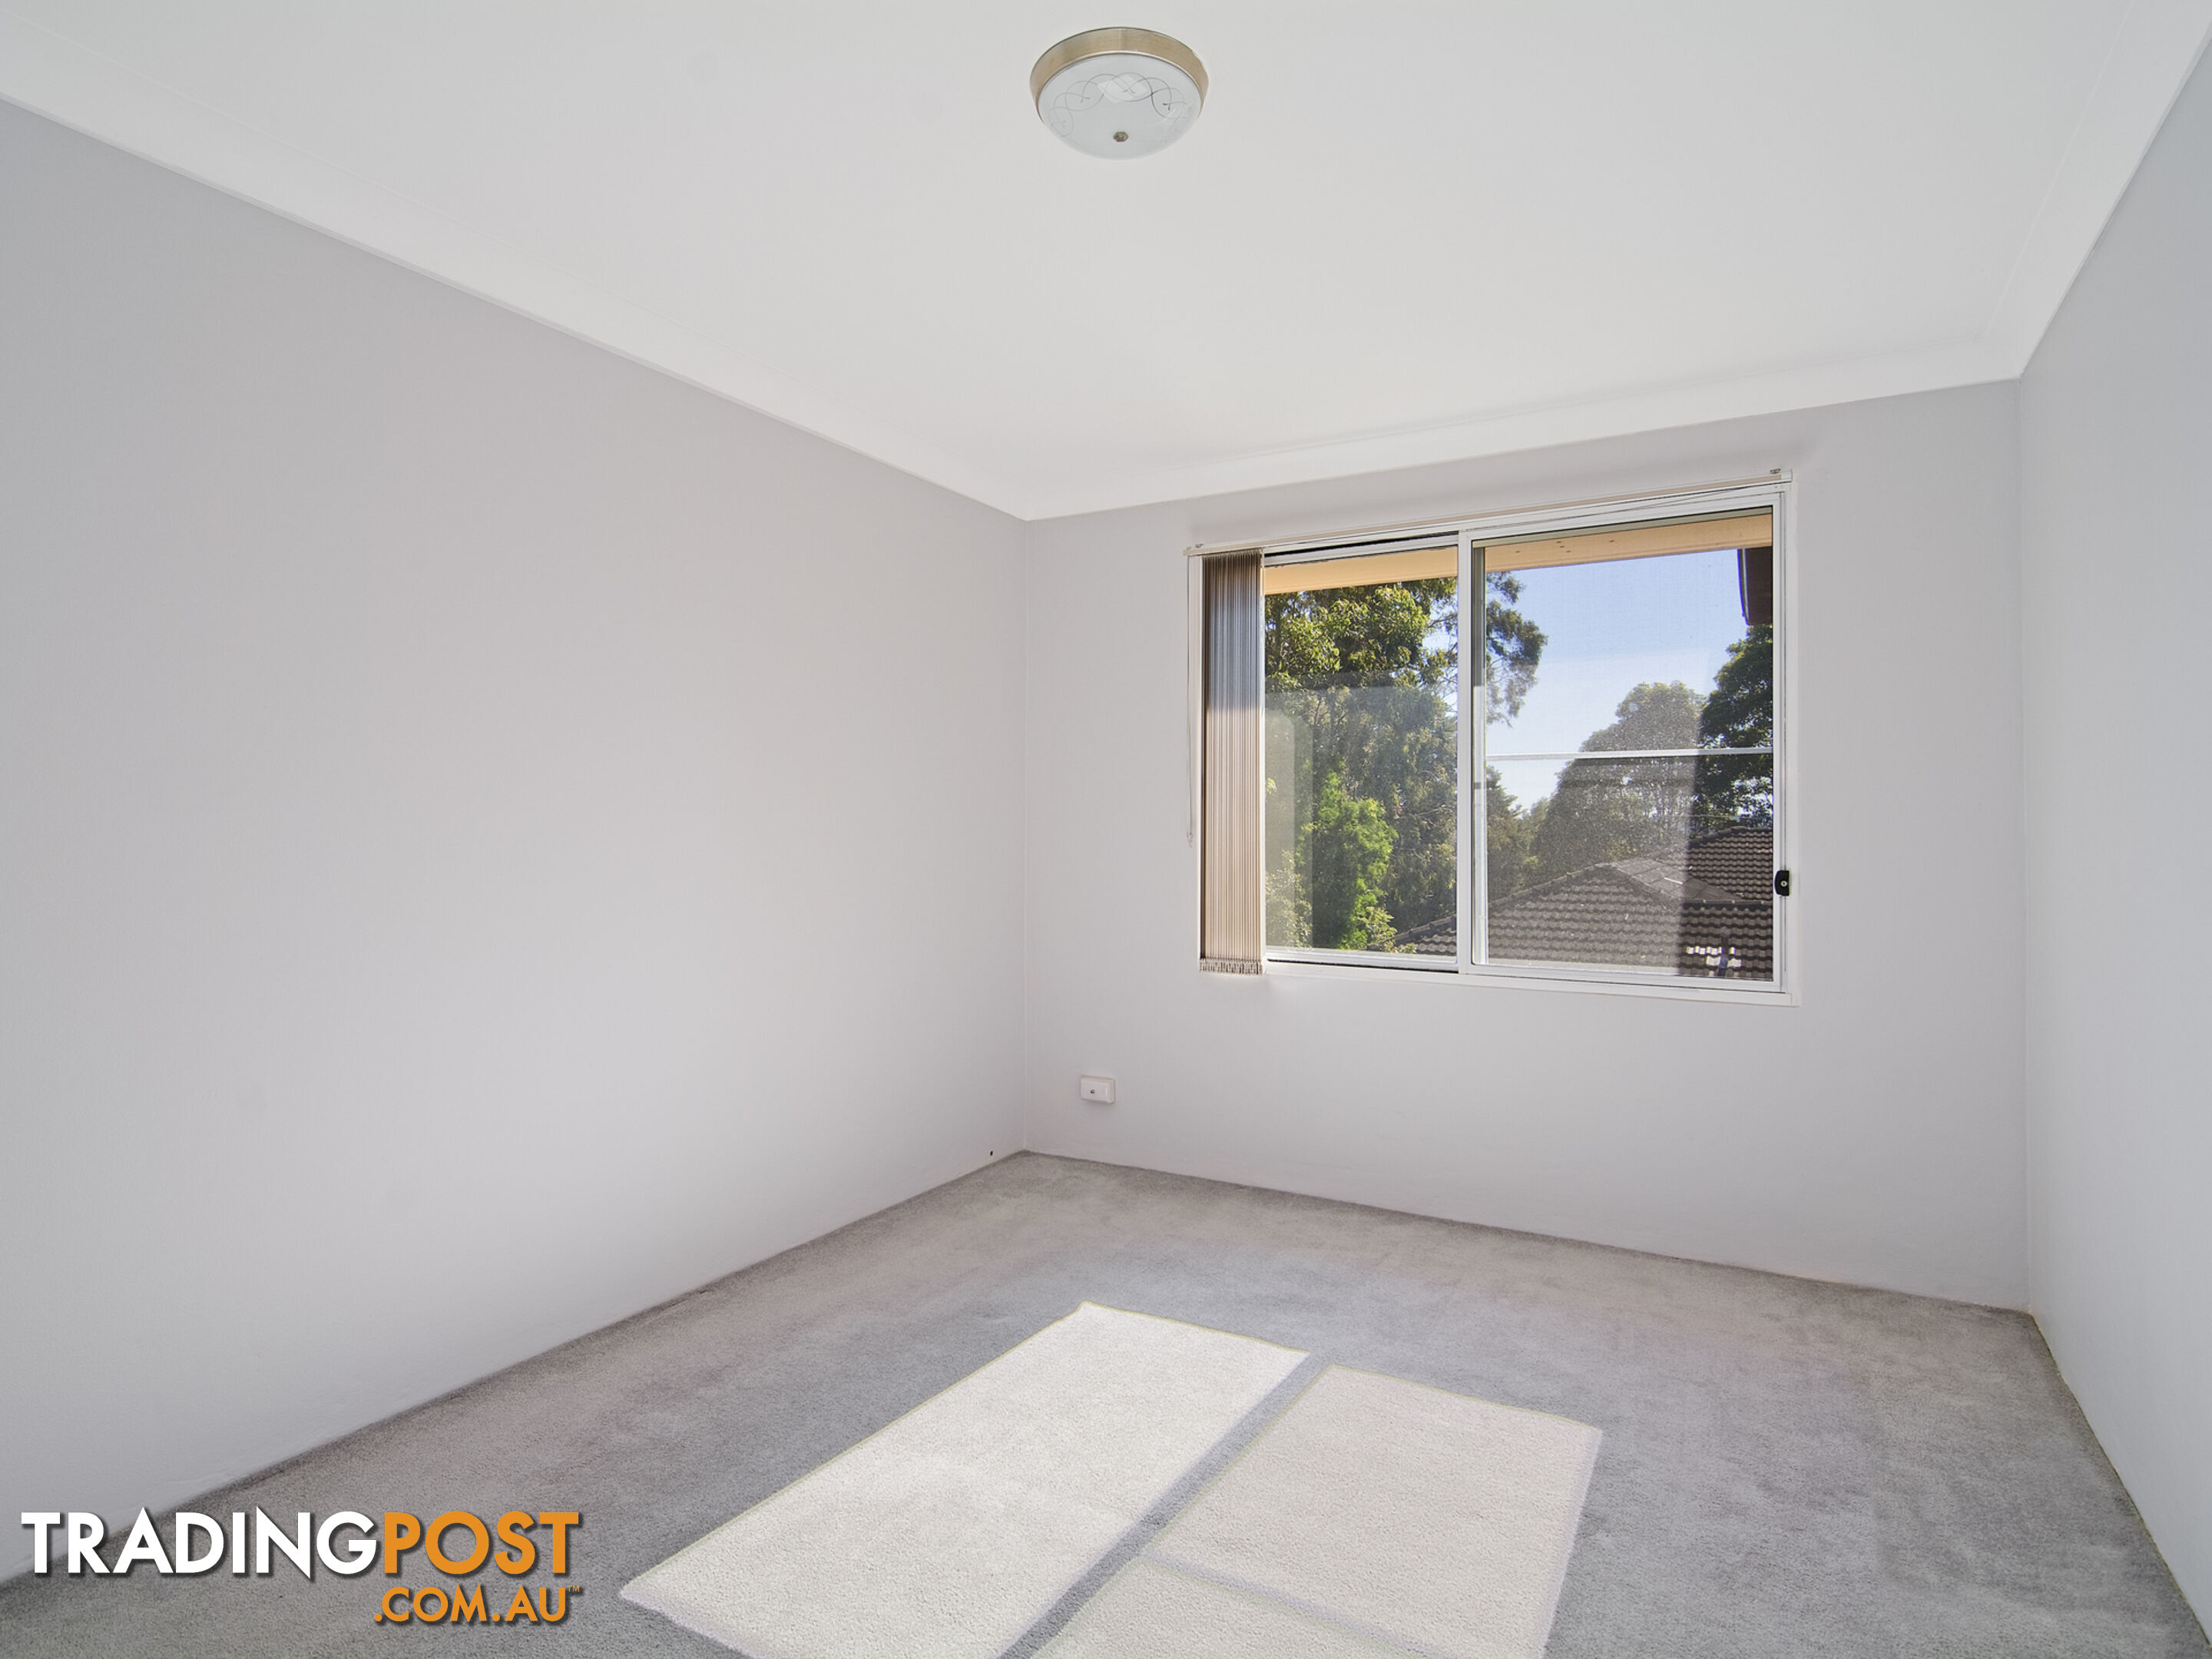 5/139 Sydney Street WILLOUGHBY NSW 2068